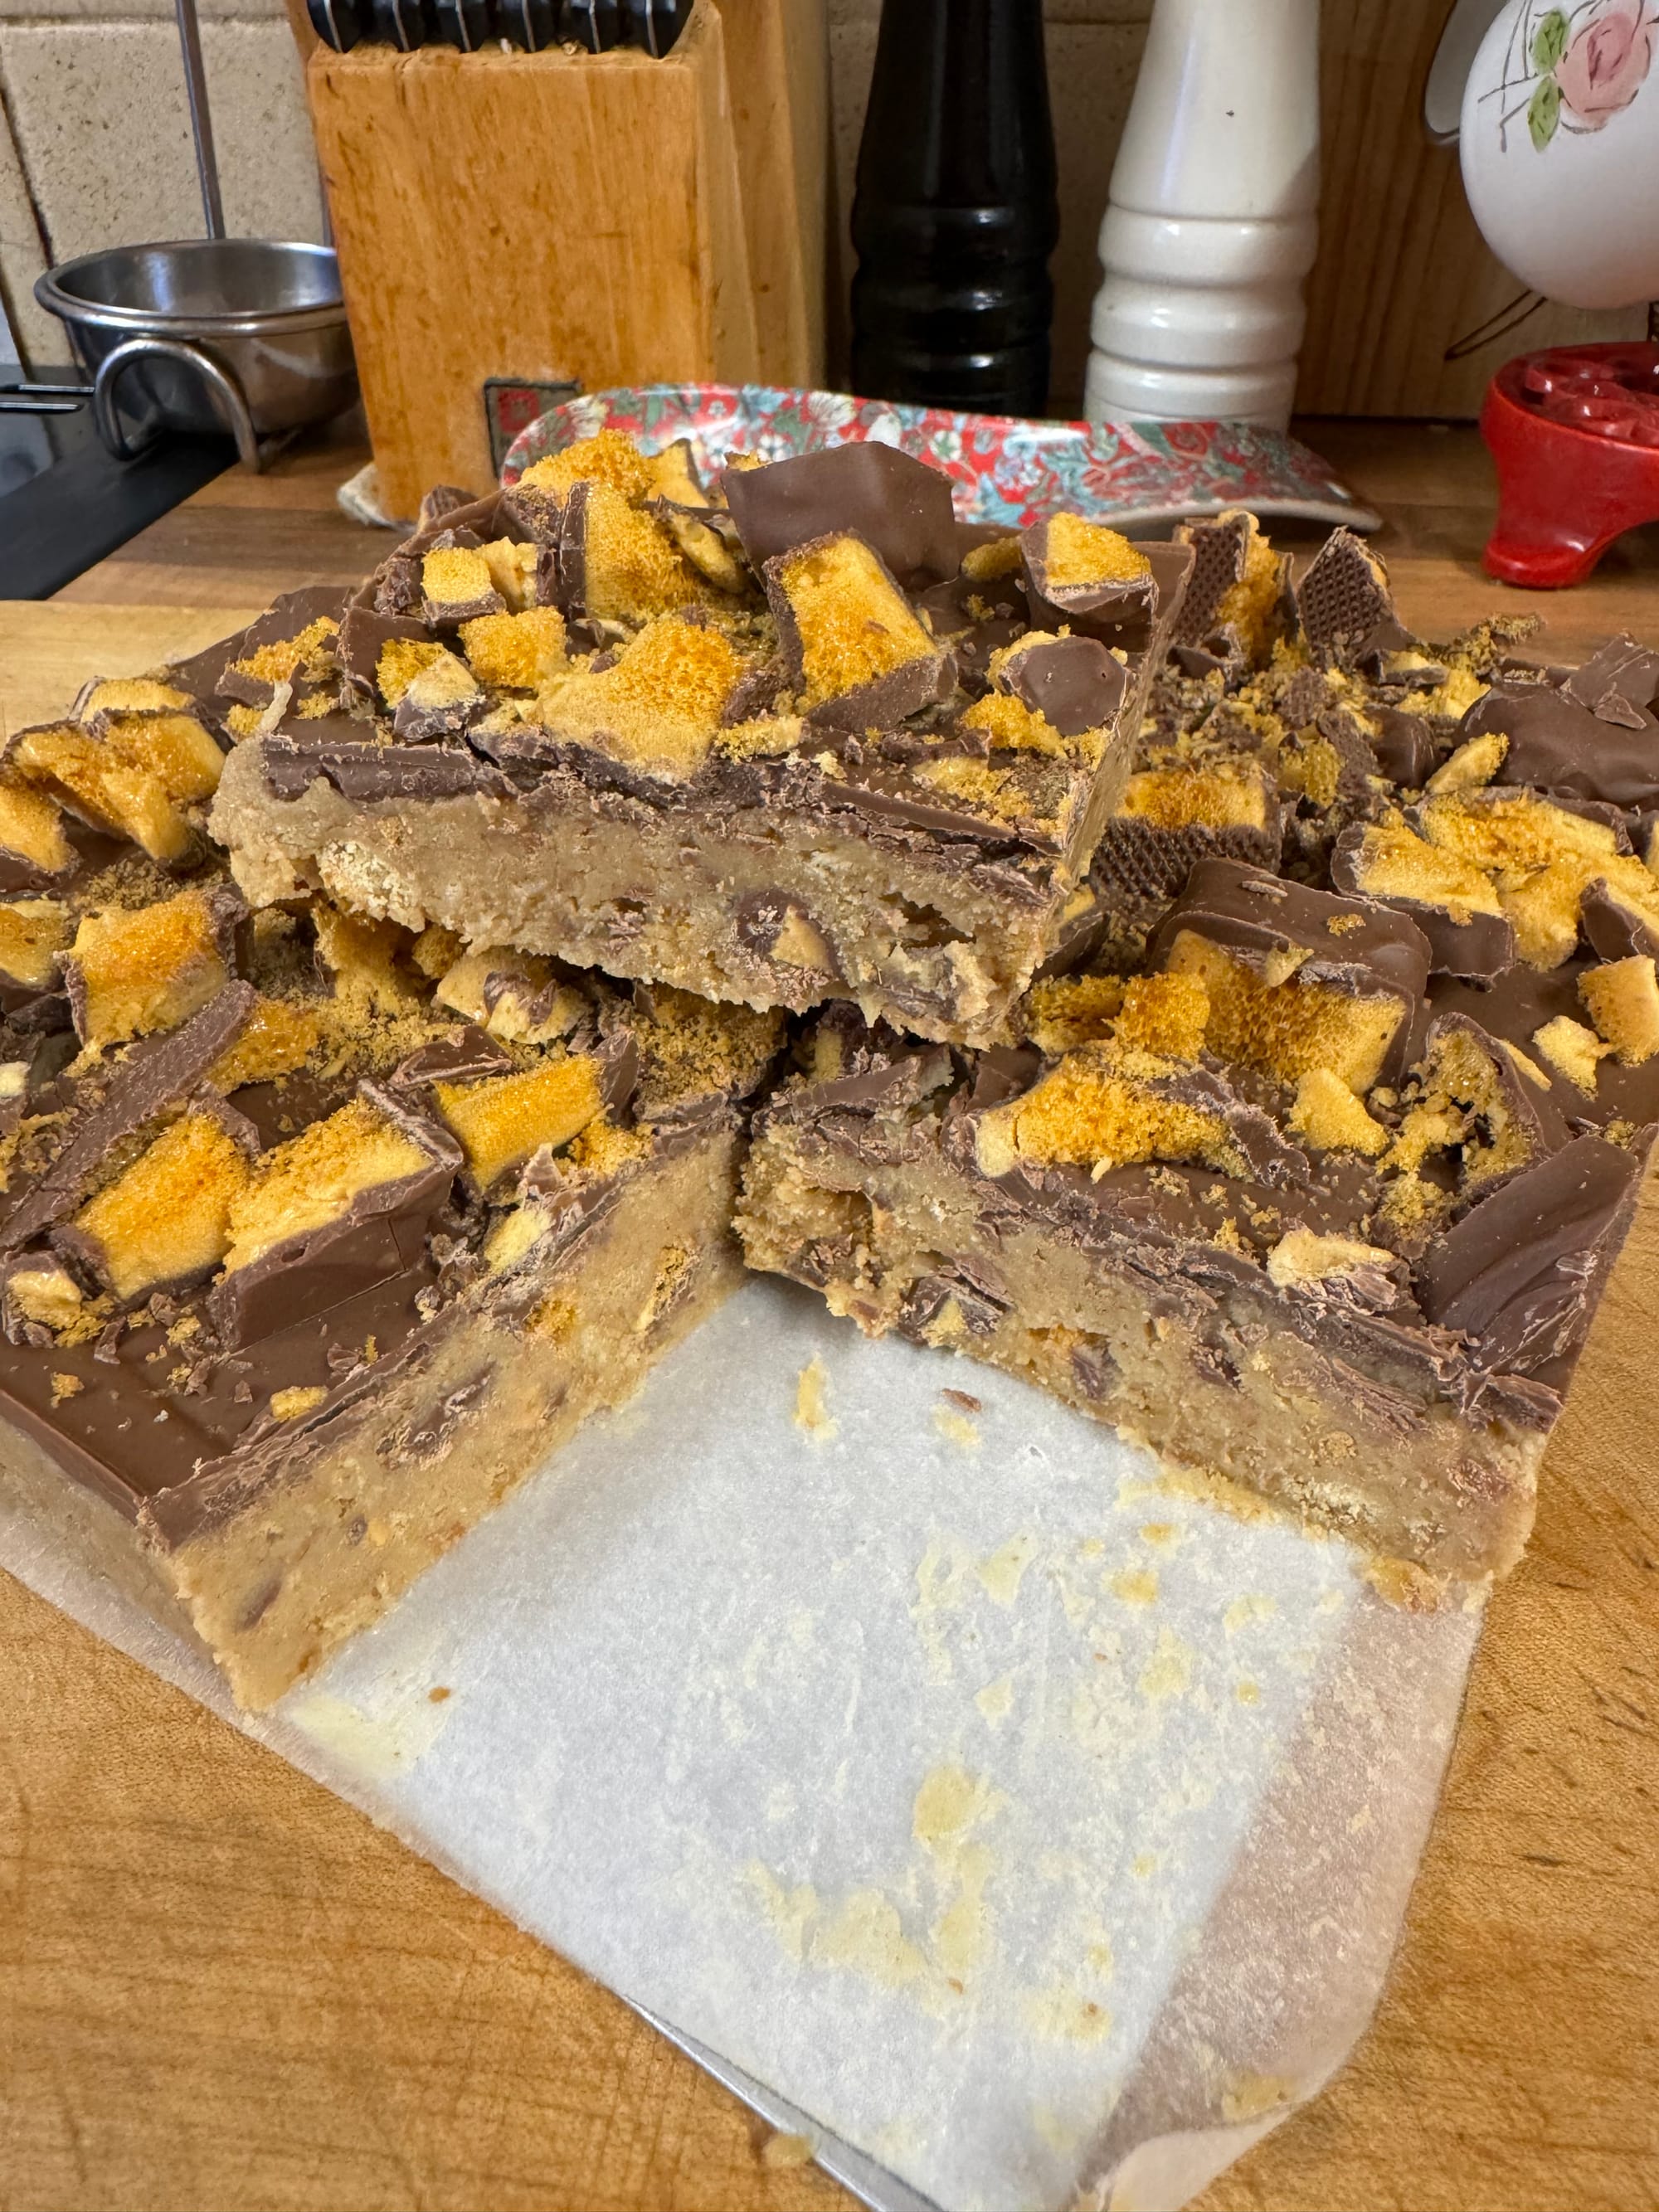 Delicious Crunchie Slice with honeycomb centre, covered in chocolate.